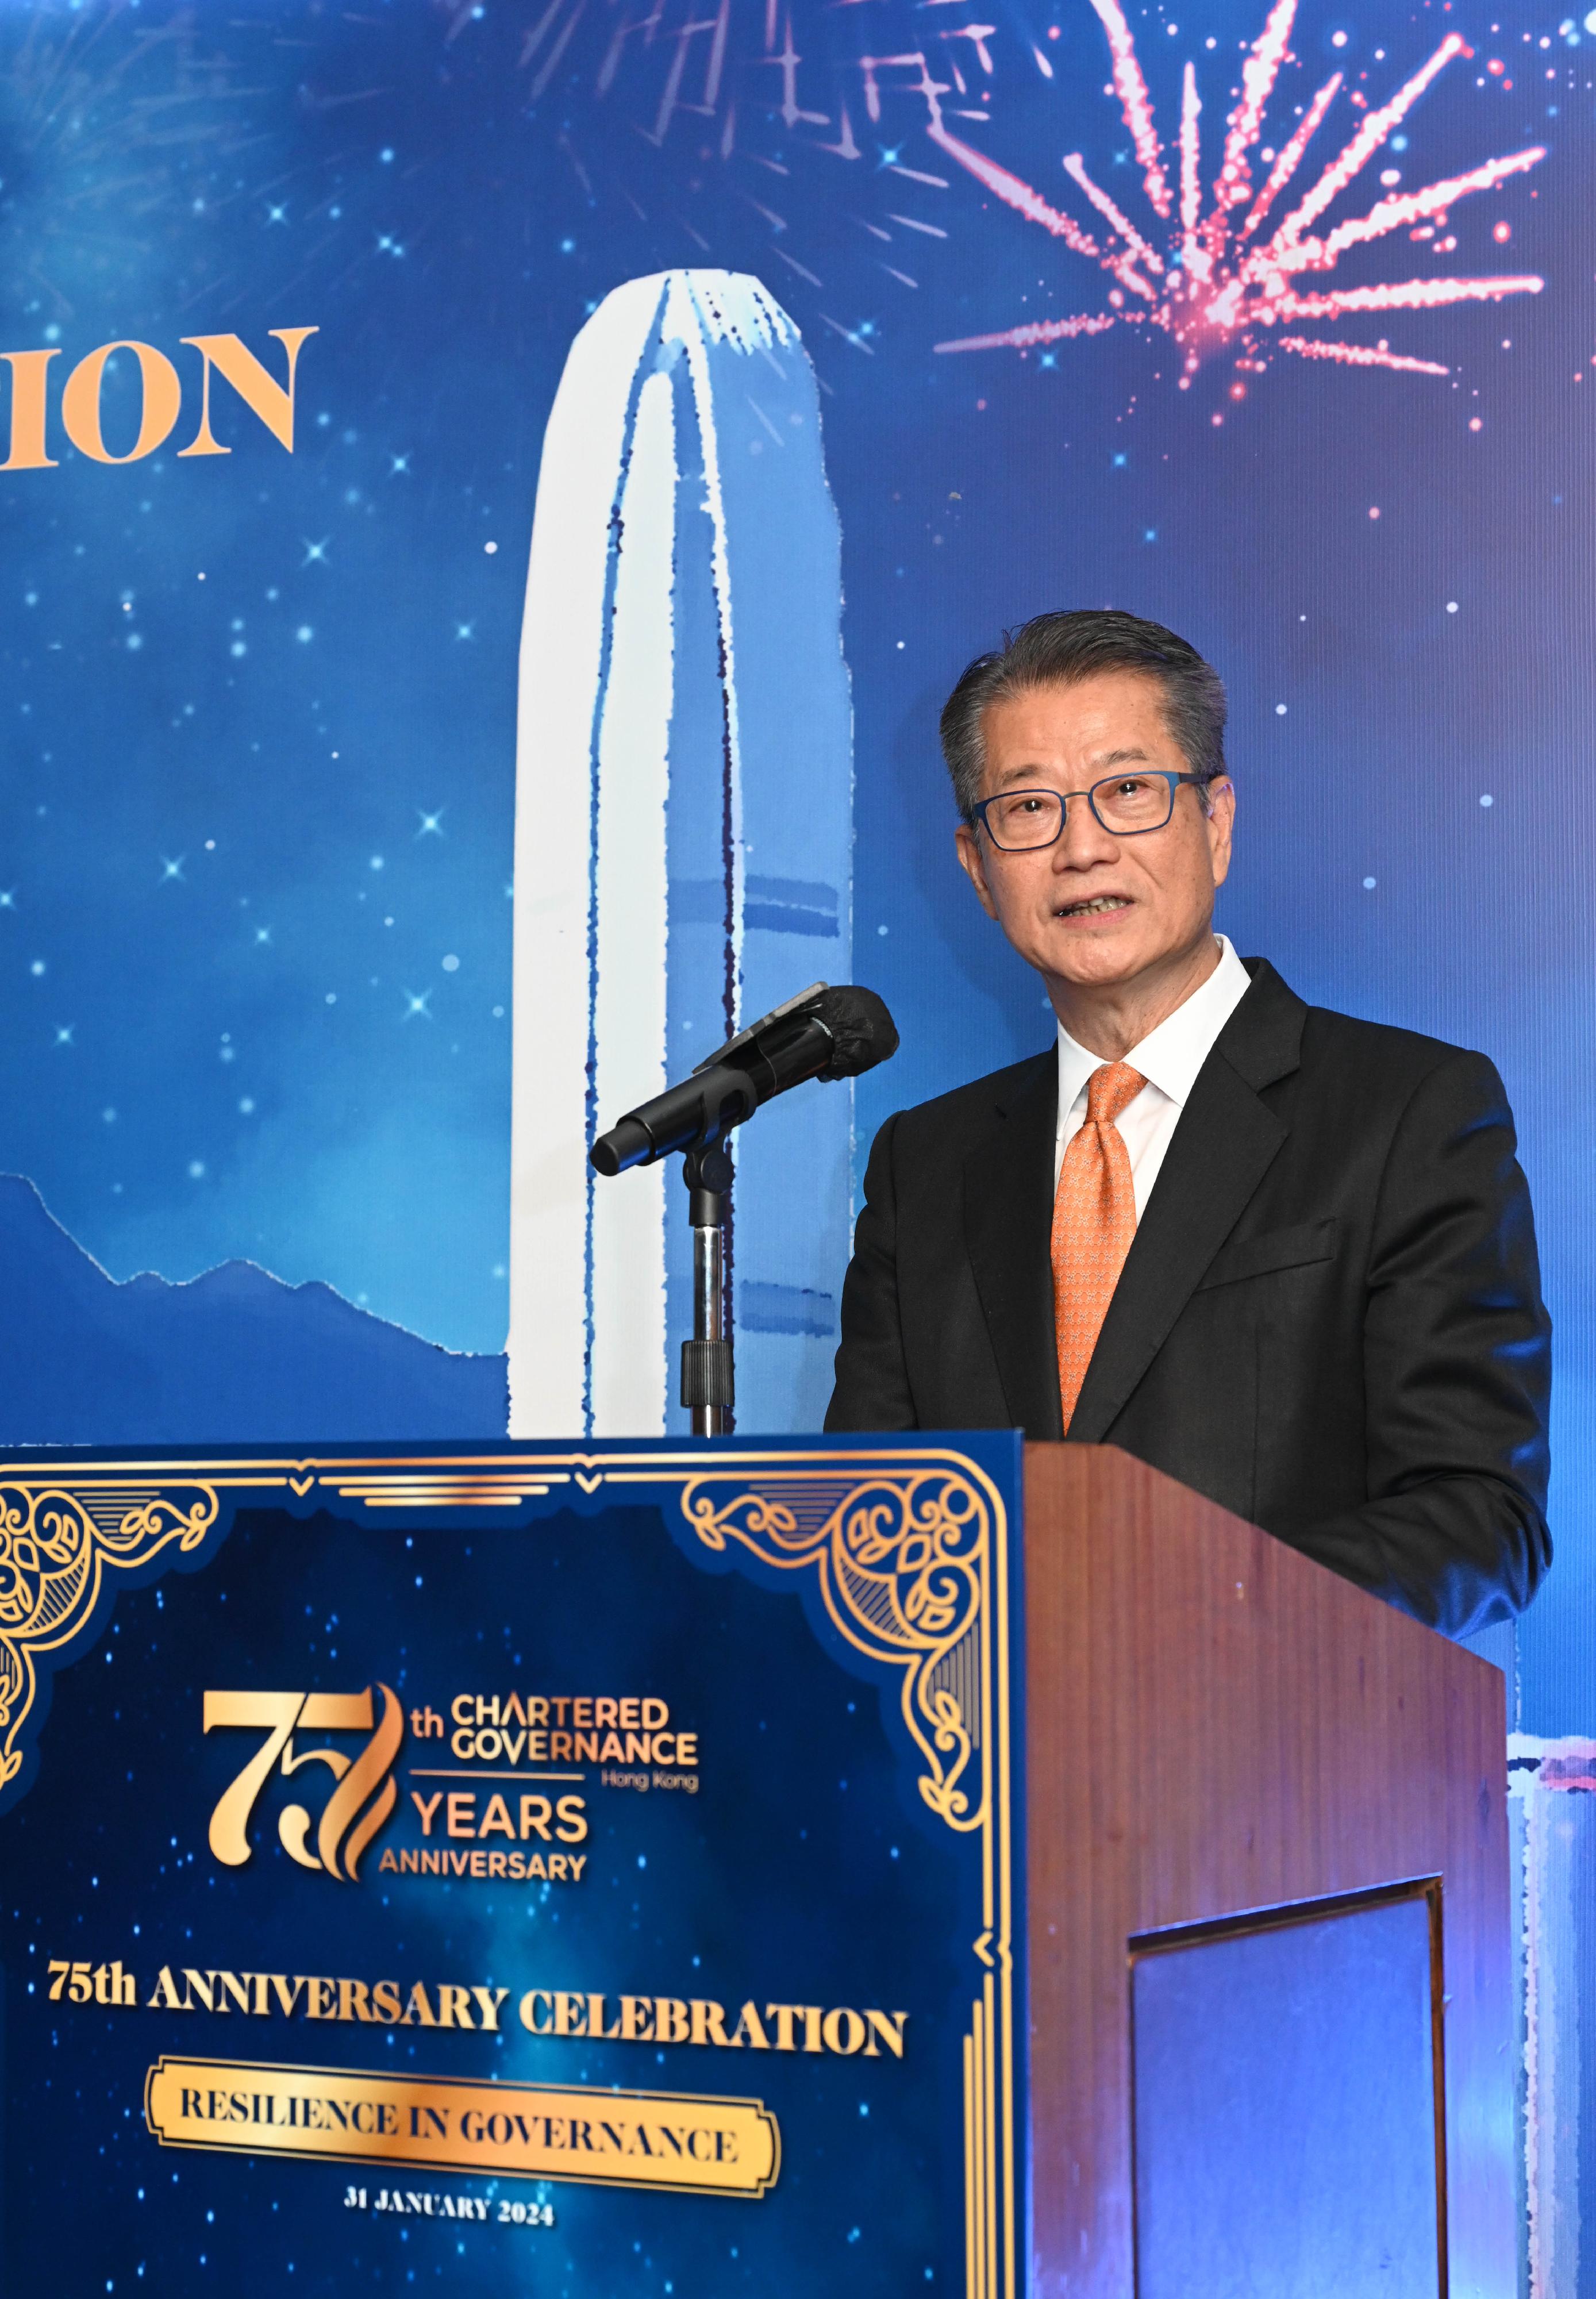 The Financial Secretary, Mr Paul Chan, speaks at the Hong Kong Chartered Governance Institute 75th Anniversary Celebration today (January 31).